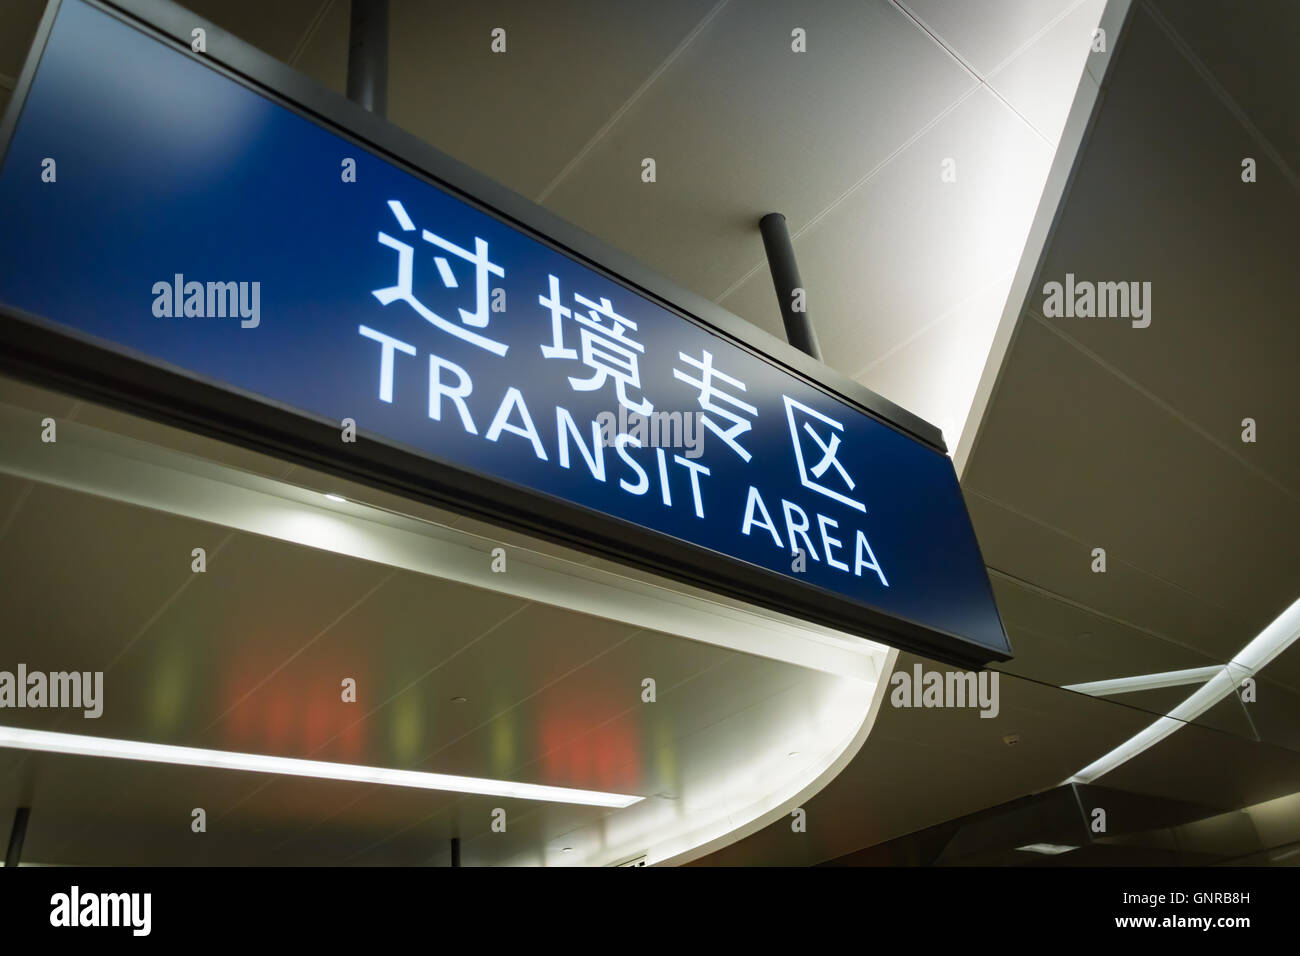 transit area airport sign in English and Chinese Stock Photo